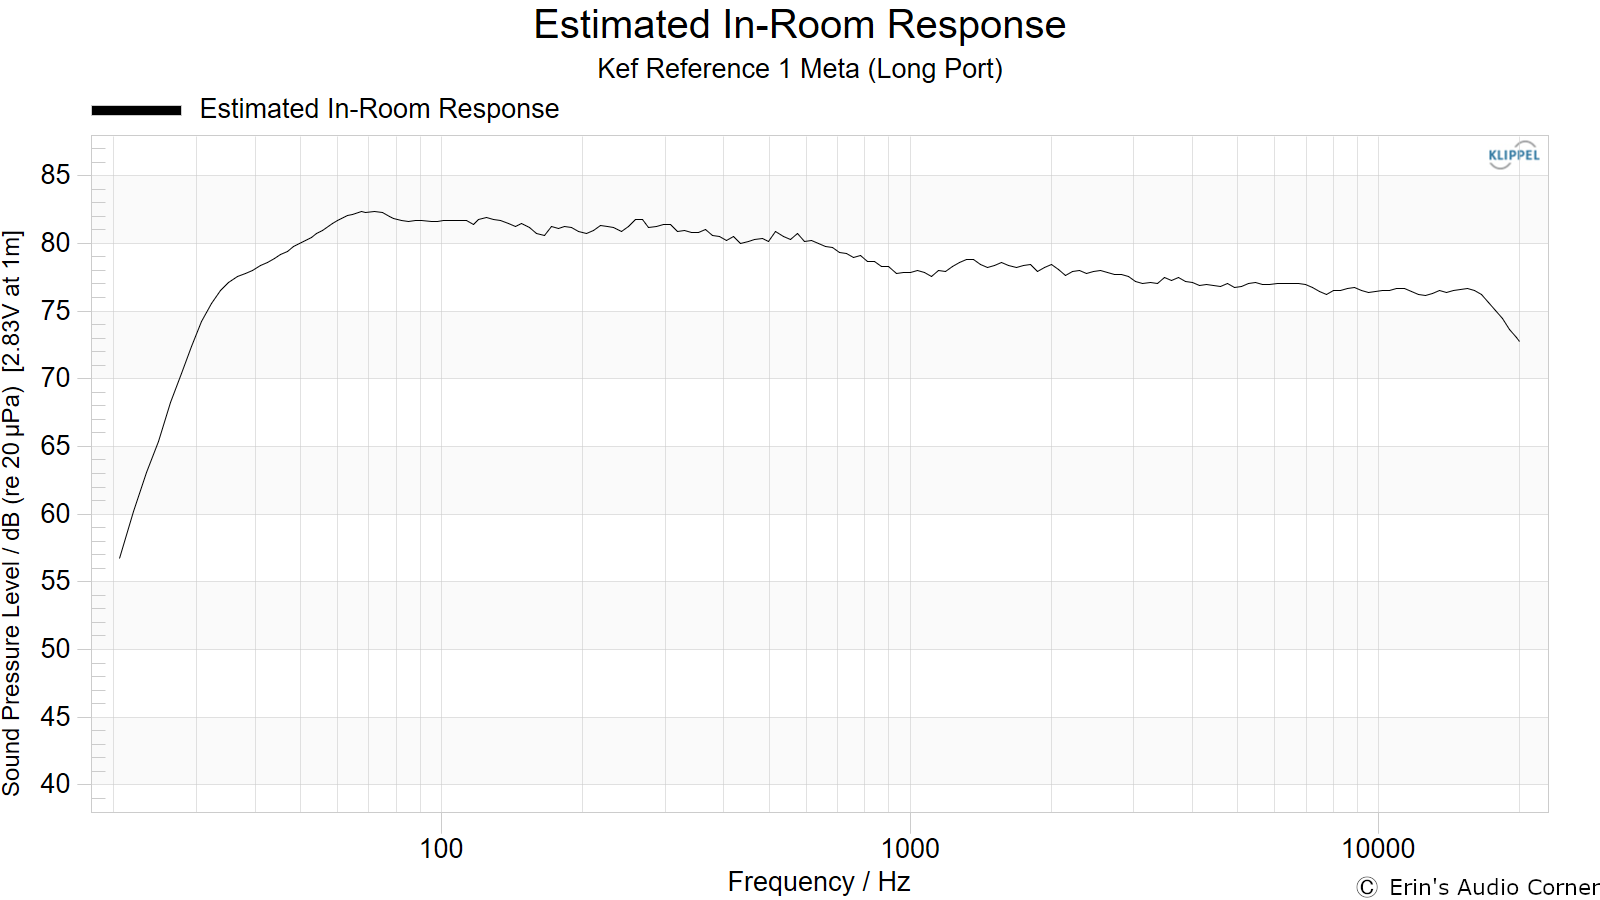 Estimated In-Room Response (long port).png